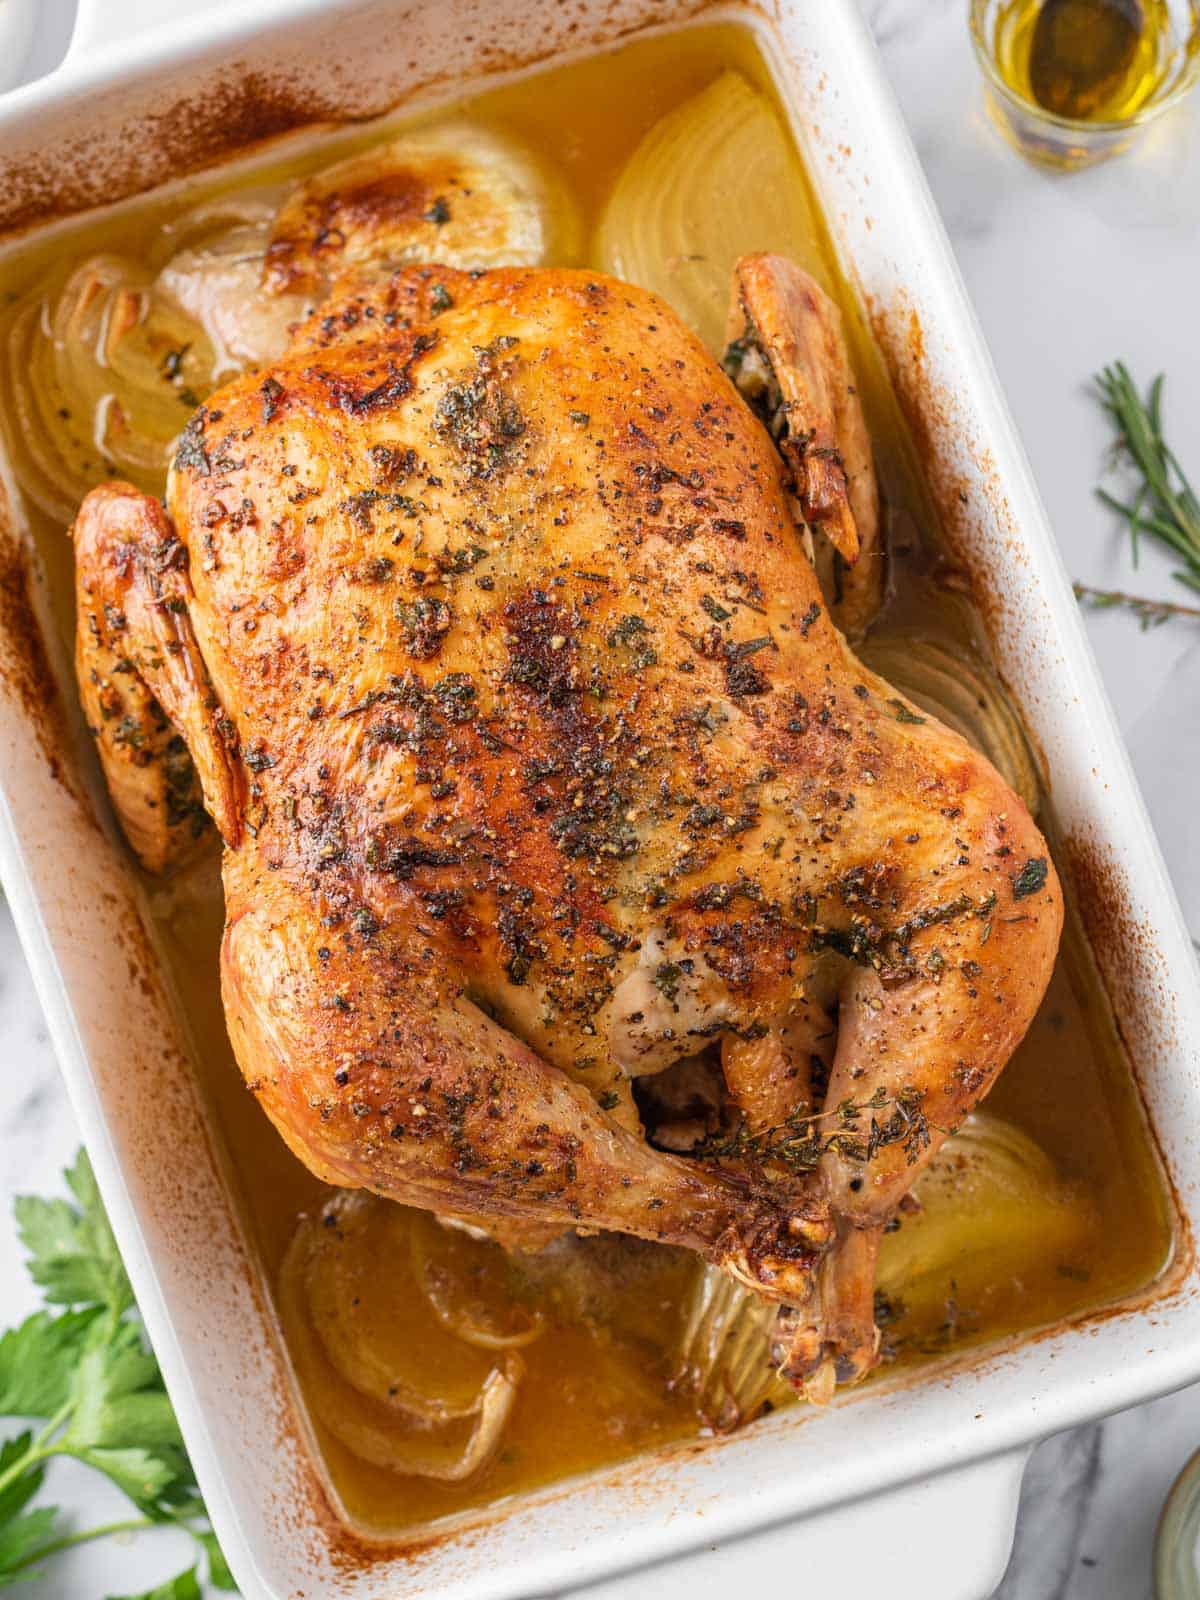 https://www.cookinwithmima.com/wp-content/uploads/2021/10/Oven-Baked-Whole-Roasted-Chicken-2.jpg